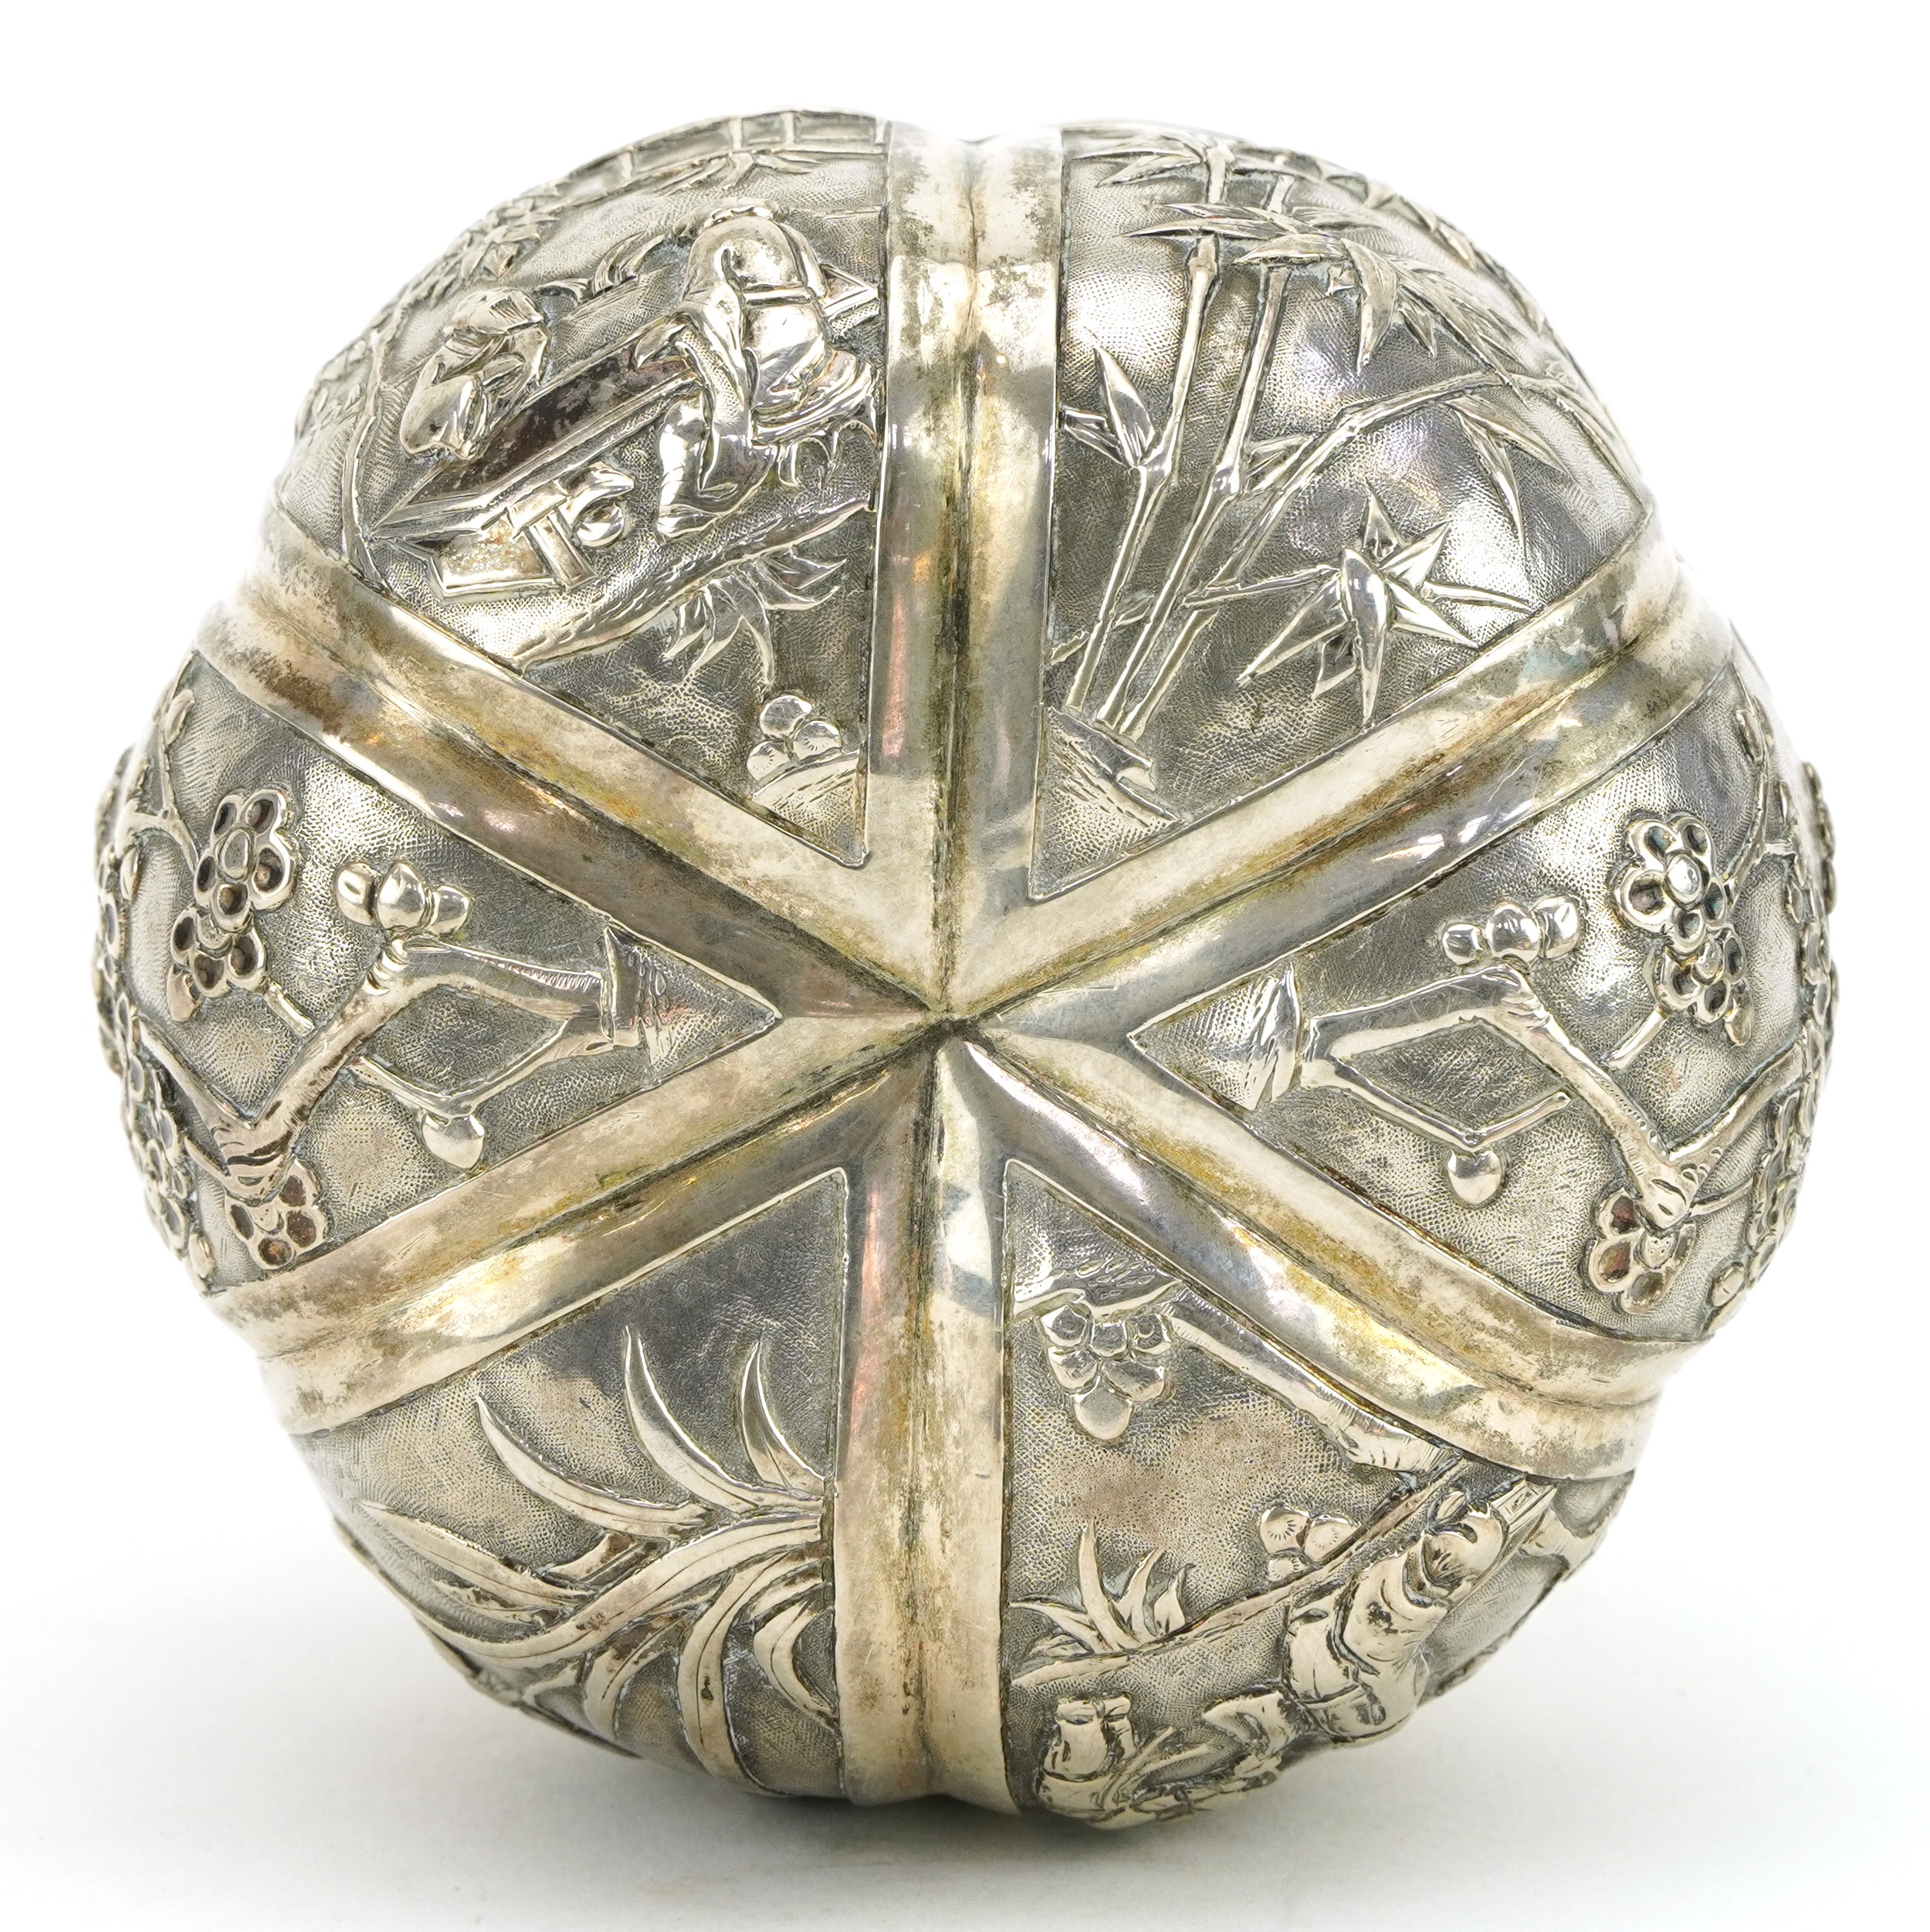 Good Chinese export silver box and cover in the form of a pumpkin embossed with figures, bamboo - Image 12 of 12